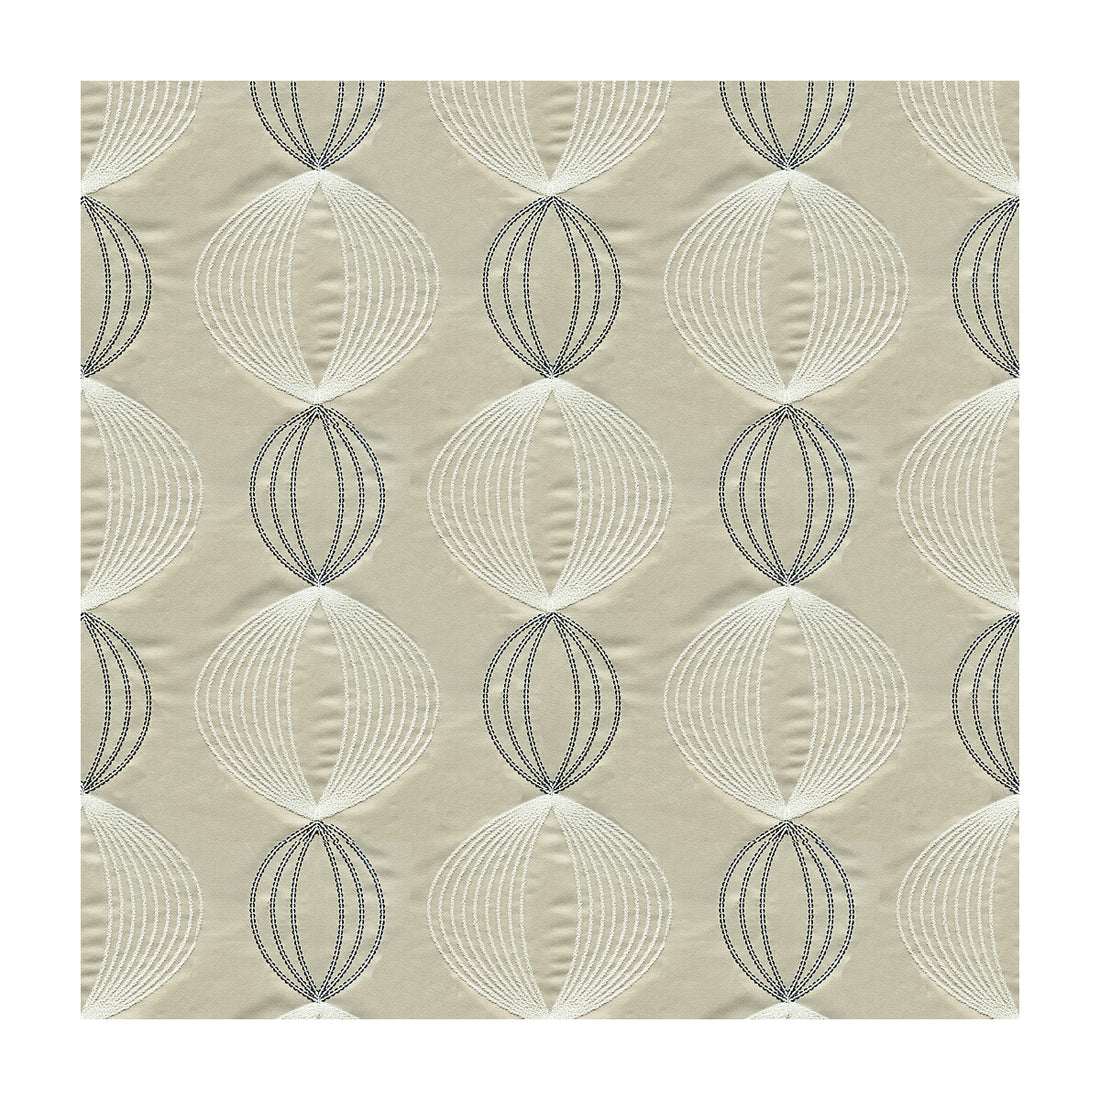 Virga fabric in greige color - pattern 4196.1611.0 - by Kravet Design in the Candice Olson collection